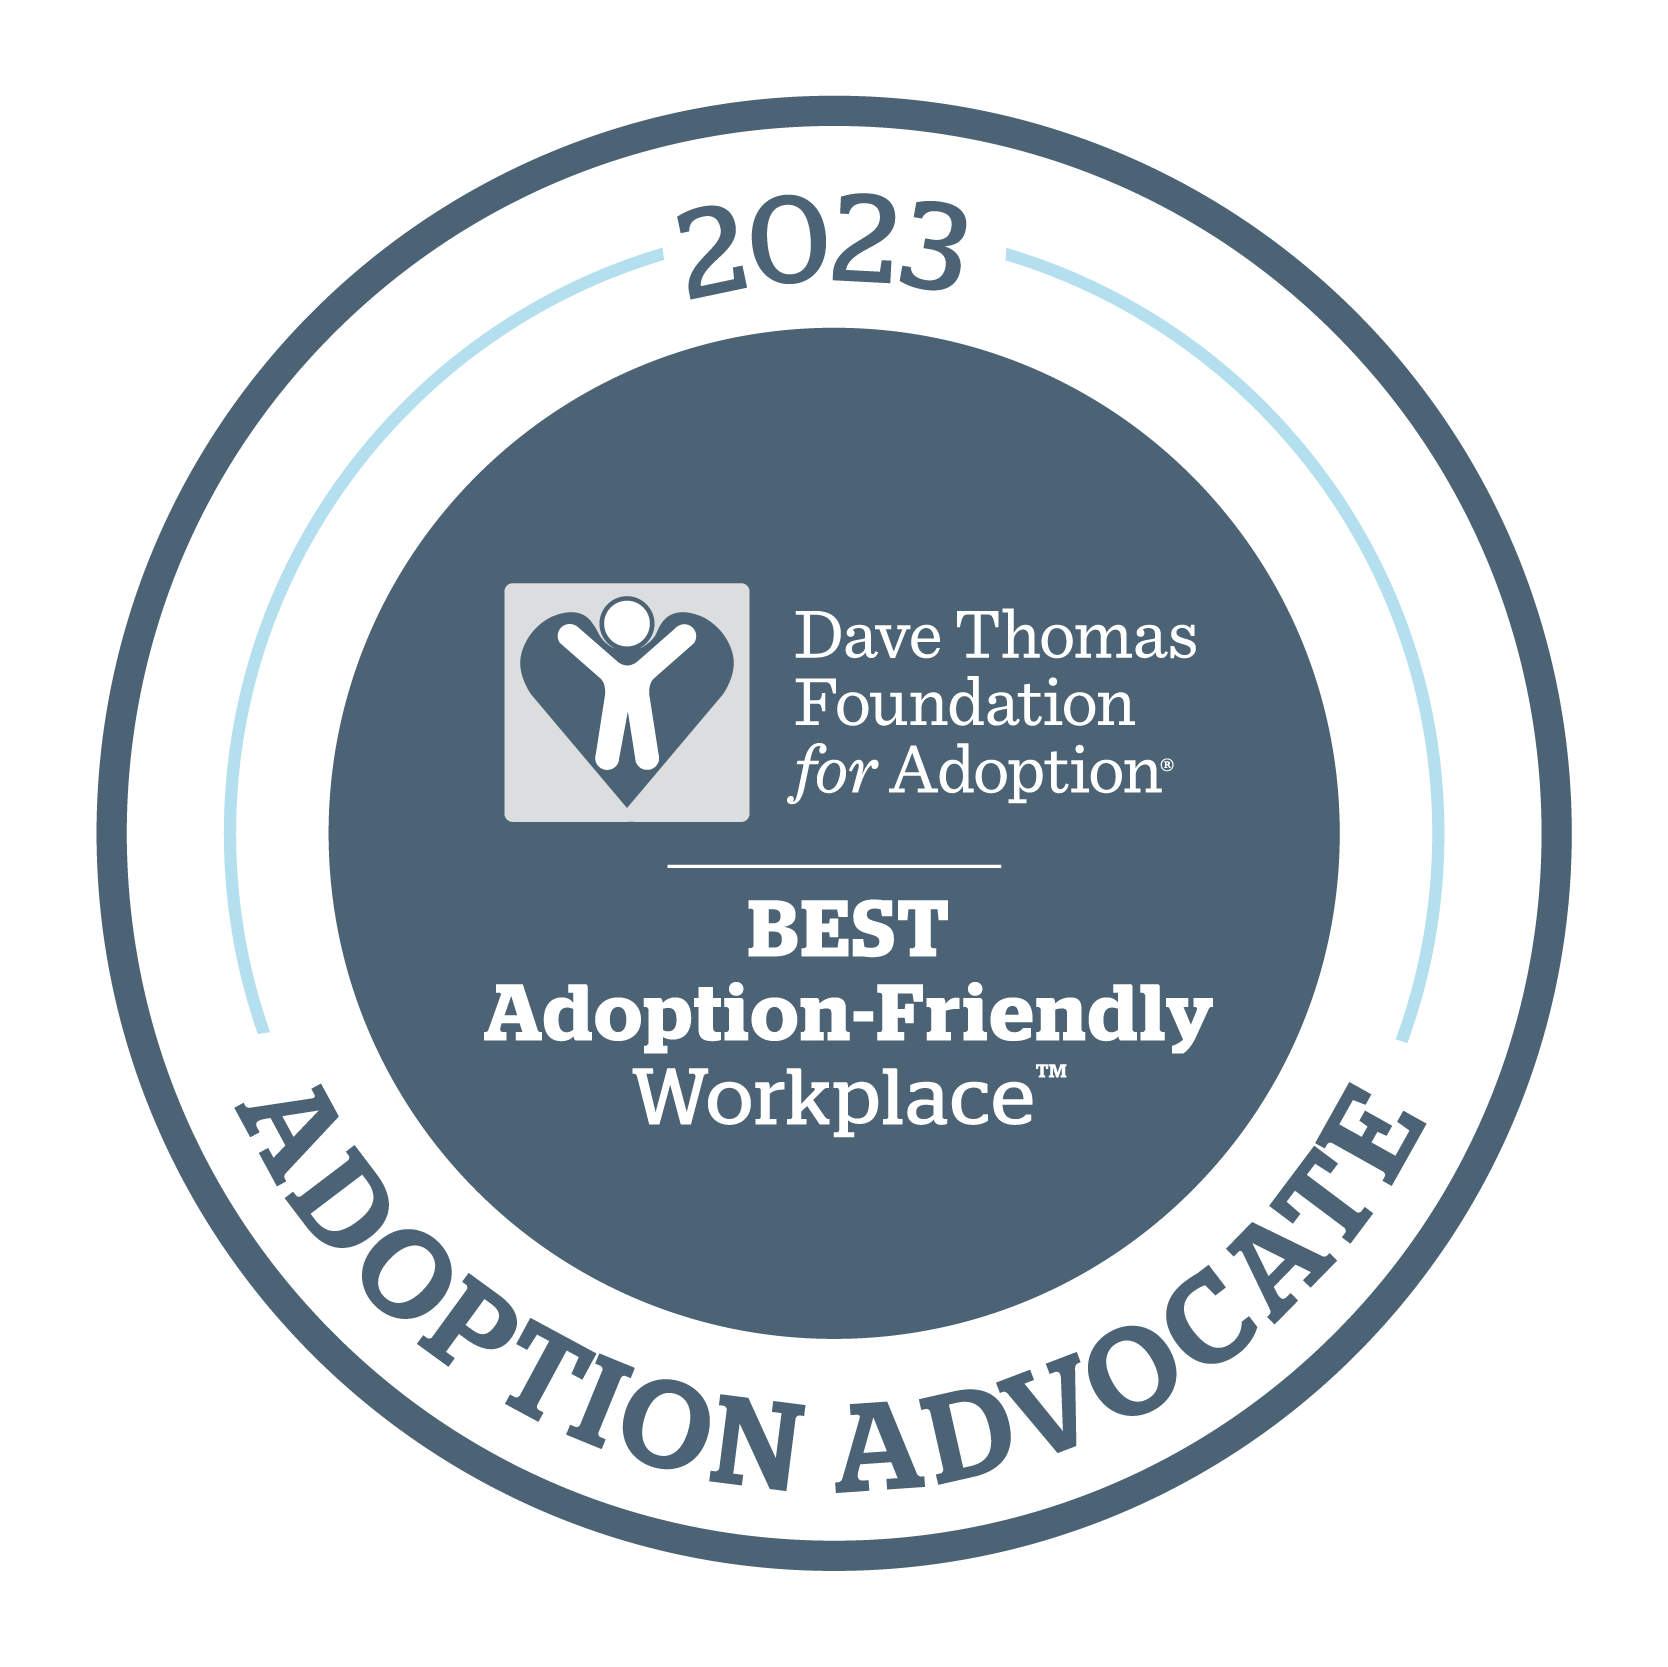 [Image Description: Circle with the text 2023 Adoption Advocate Best Adoption-Friendly Workplace, Dave Thomas Foundation for Adoption, inside. The circle also includes the Dave Thomas Foundation for Adoption Logo a white sketch of a person with their arms in the air in the center of a heart. End Image Description]